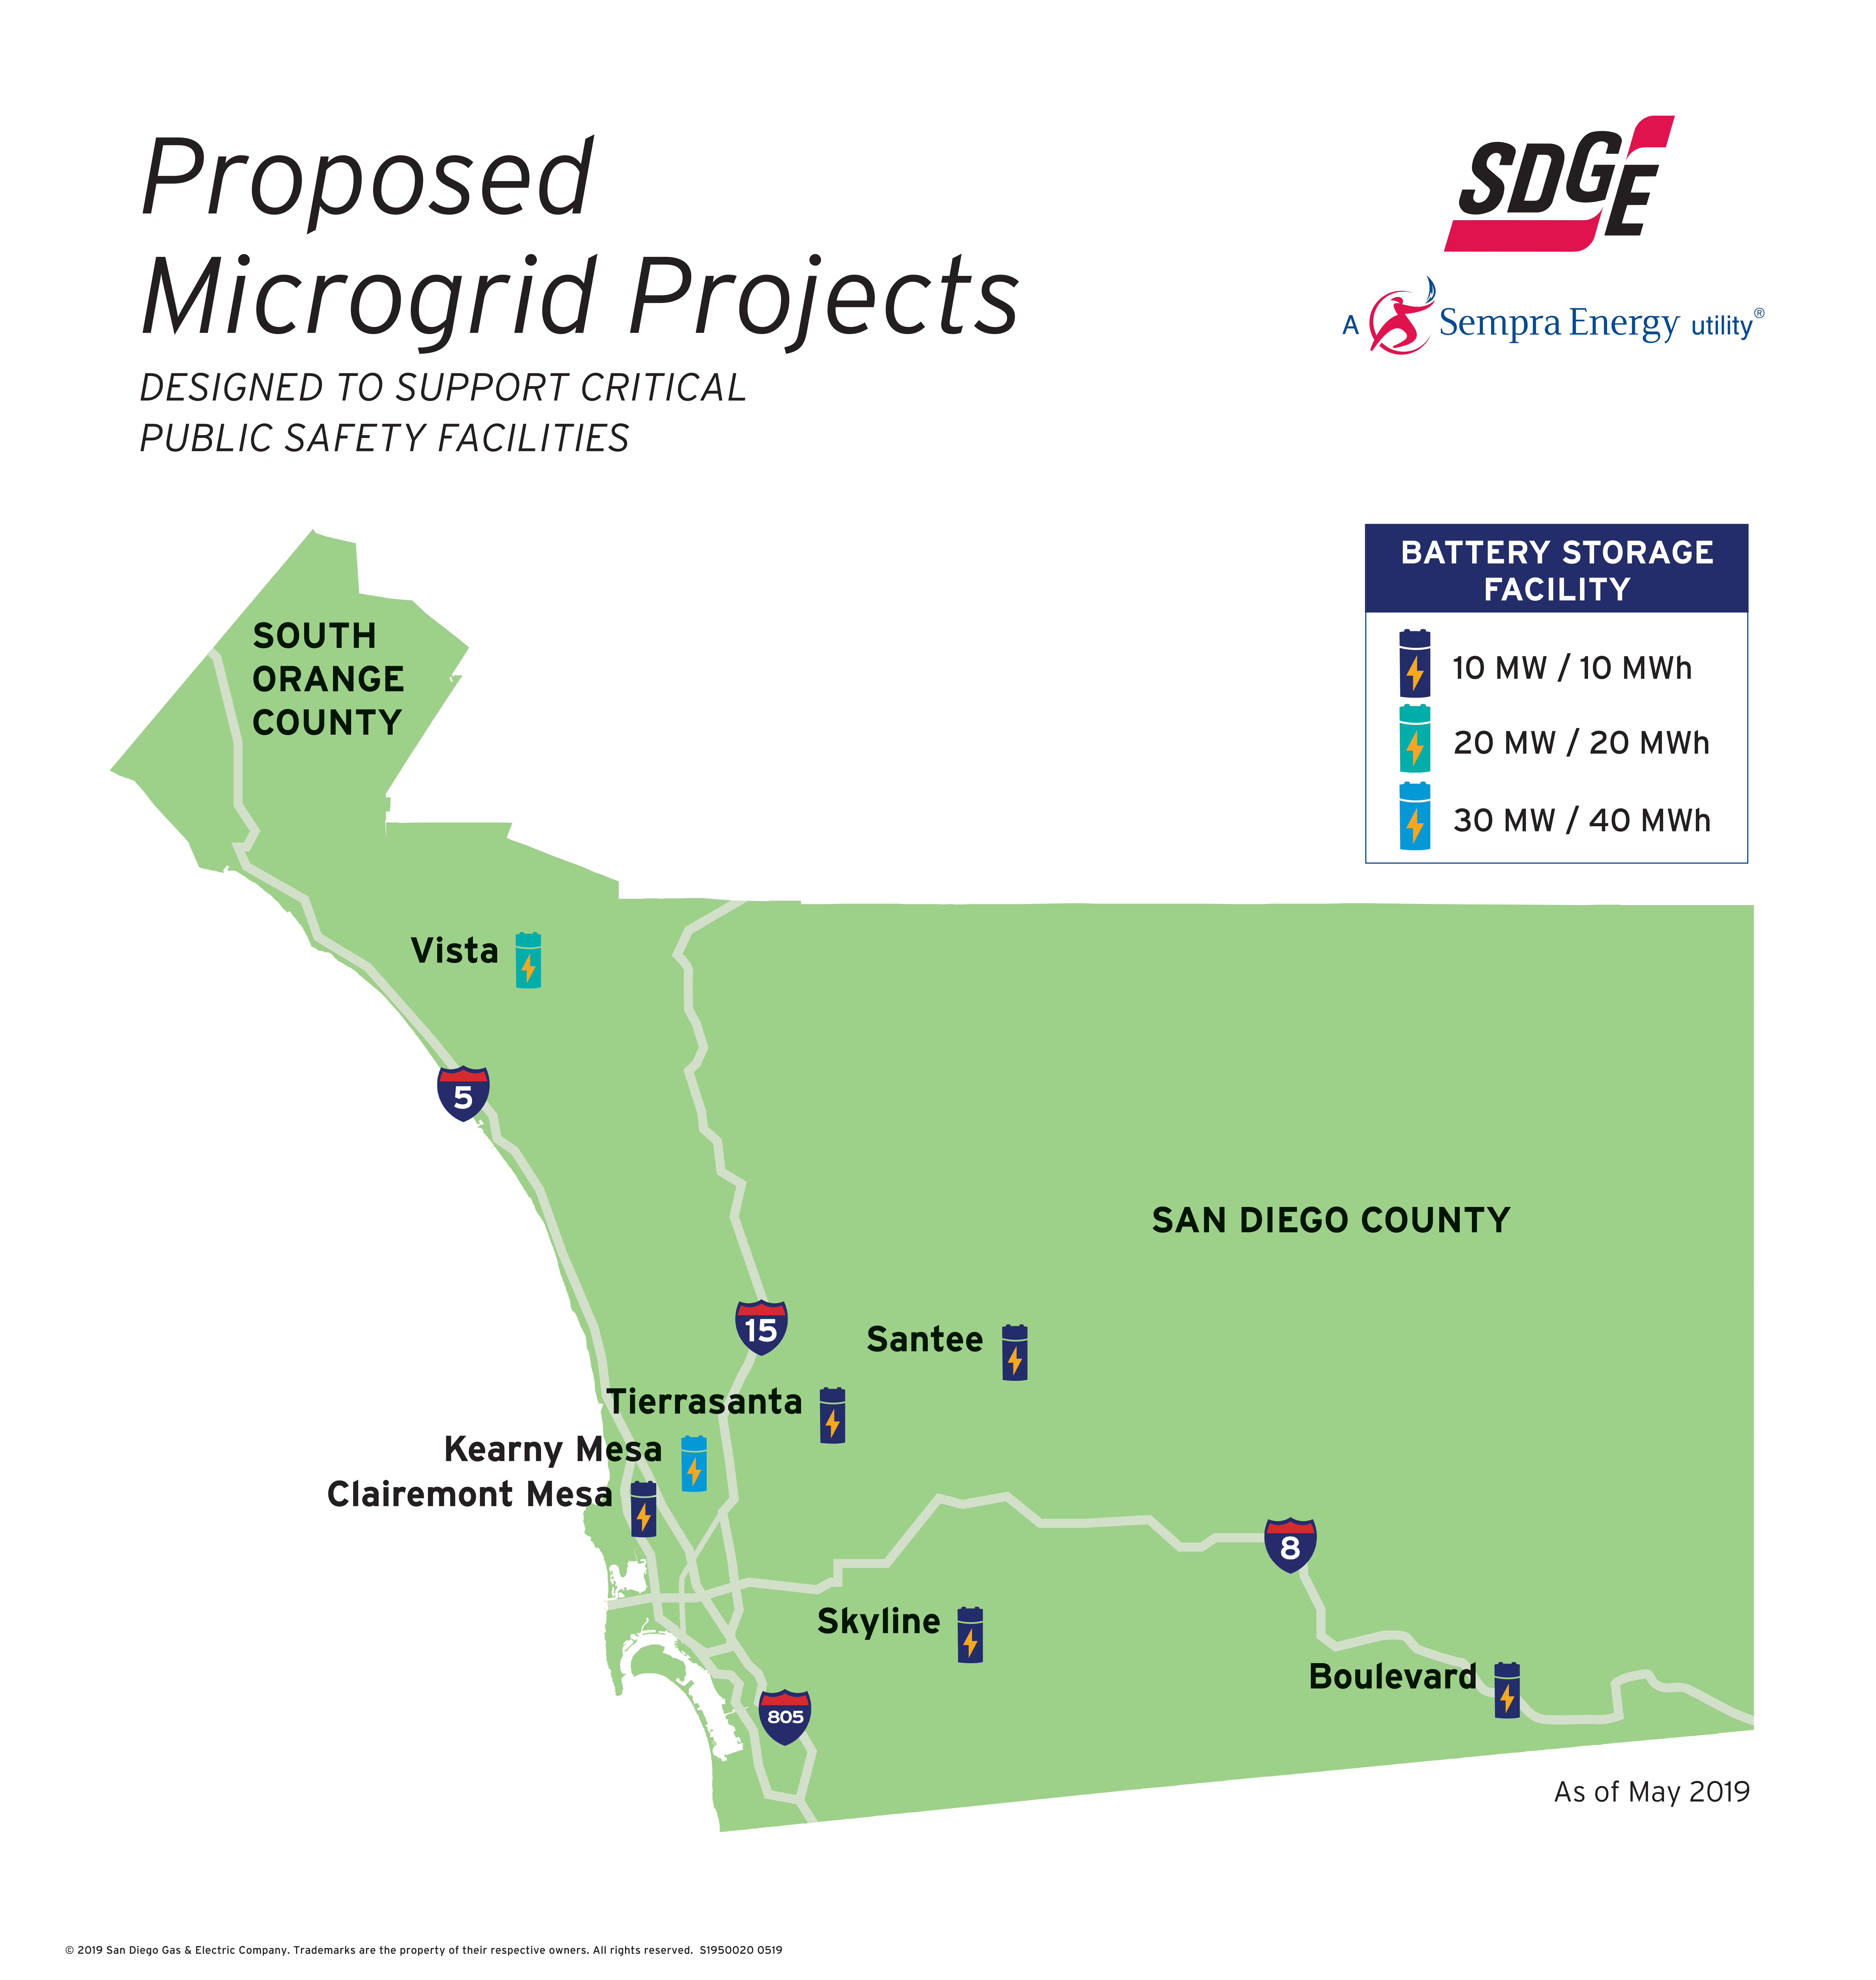 Proposed microgrid projects map